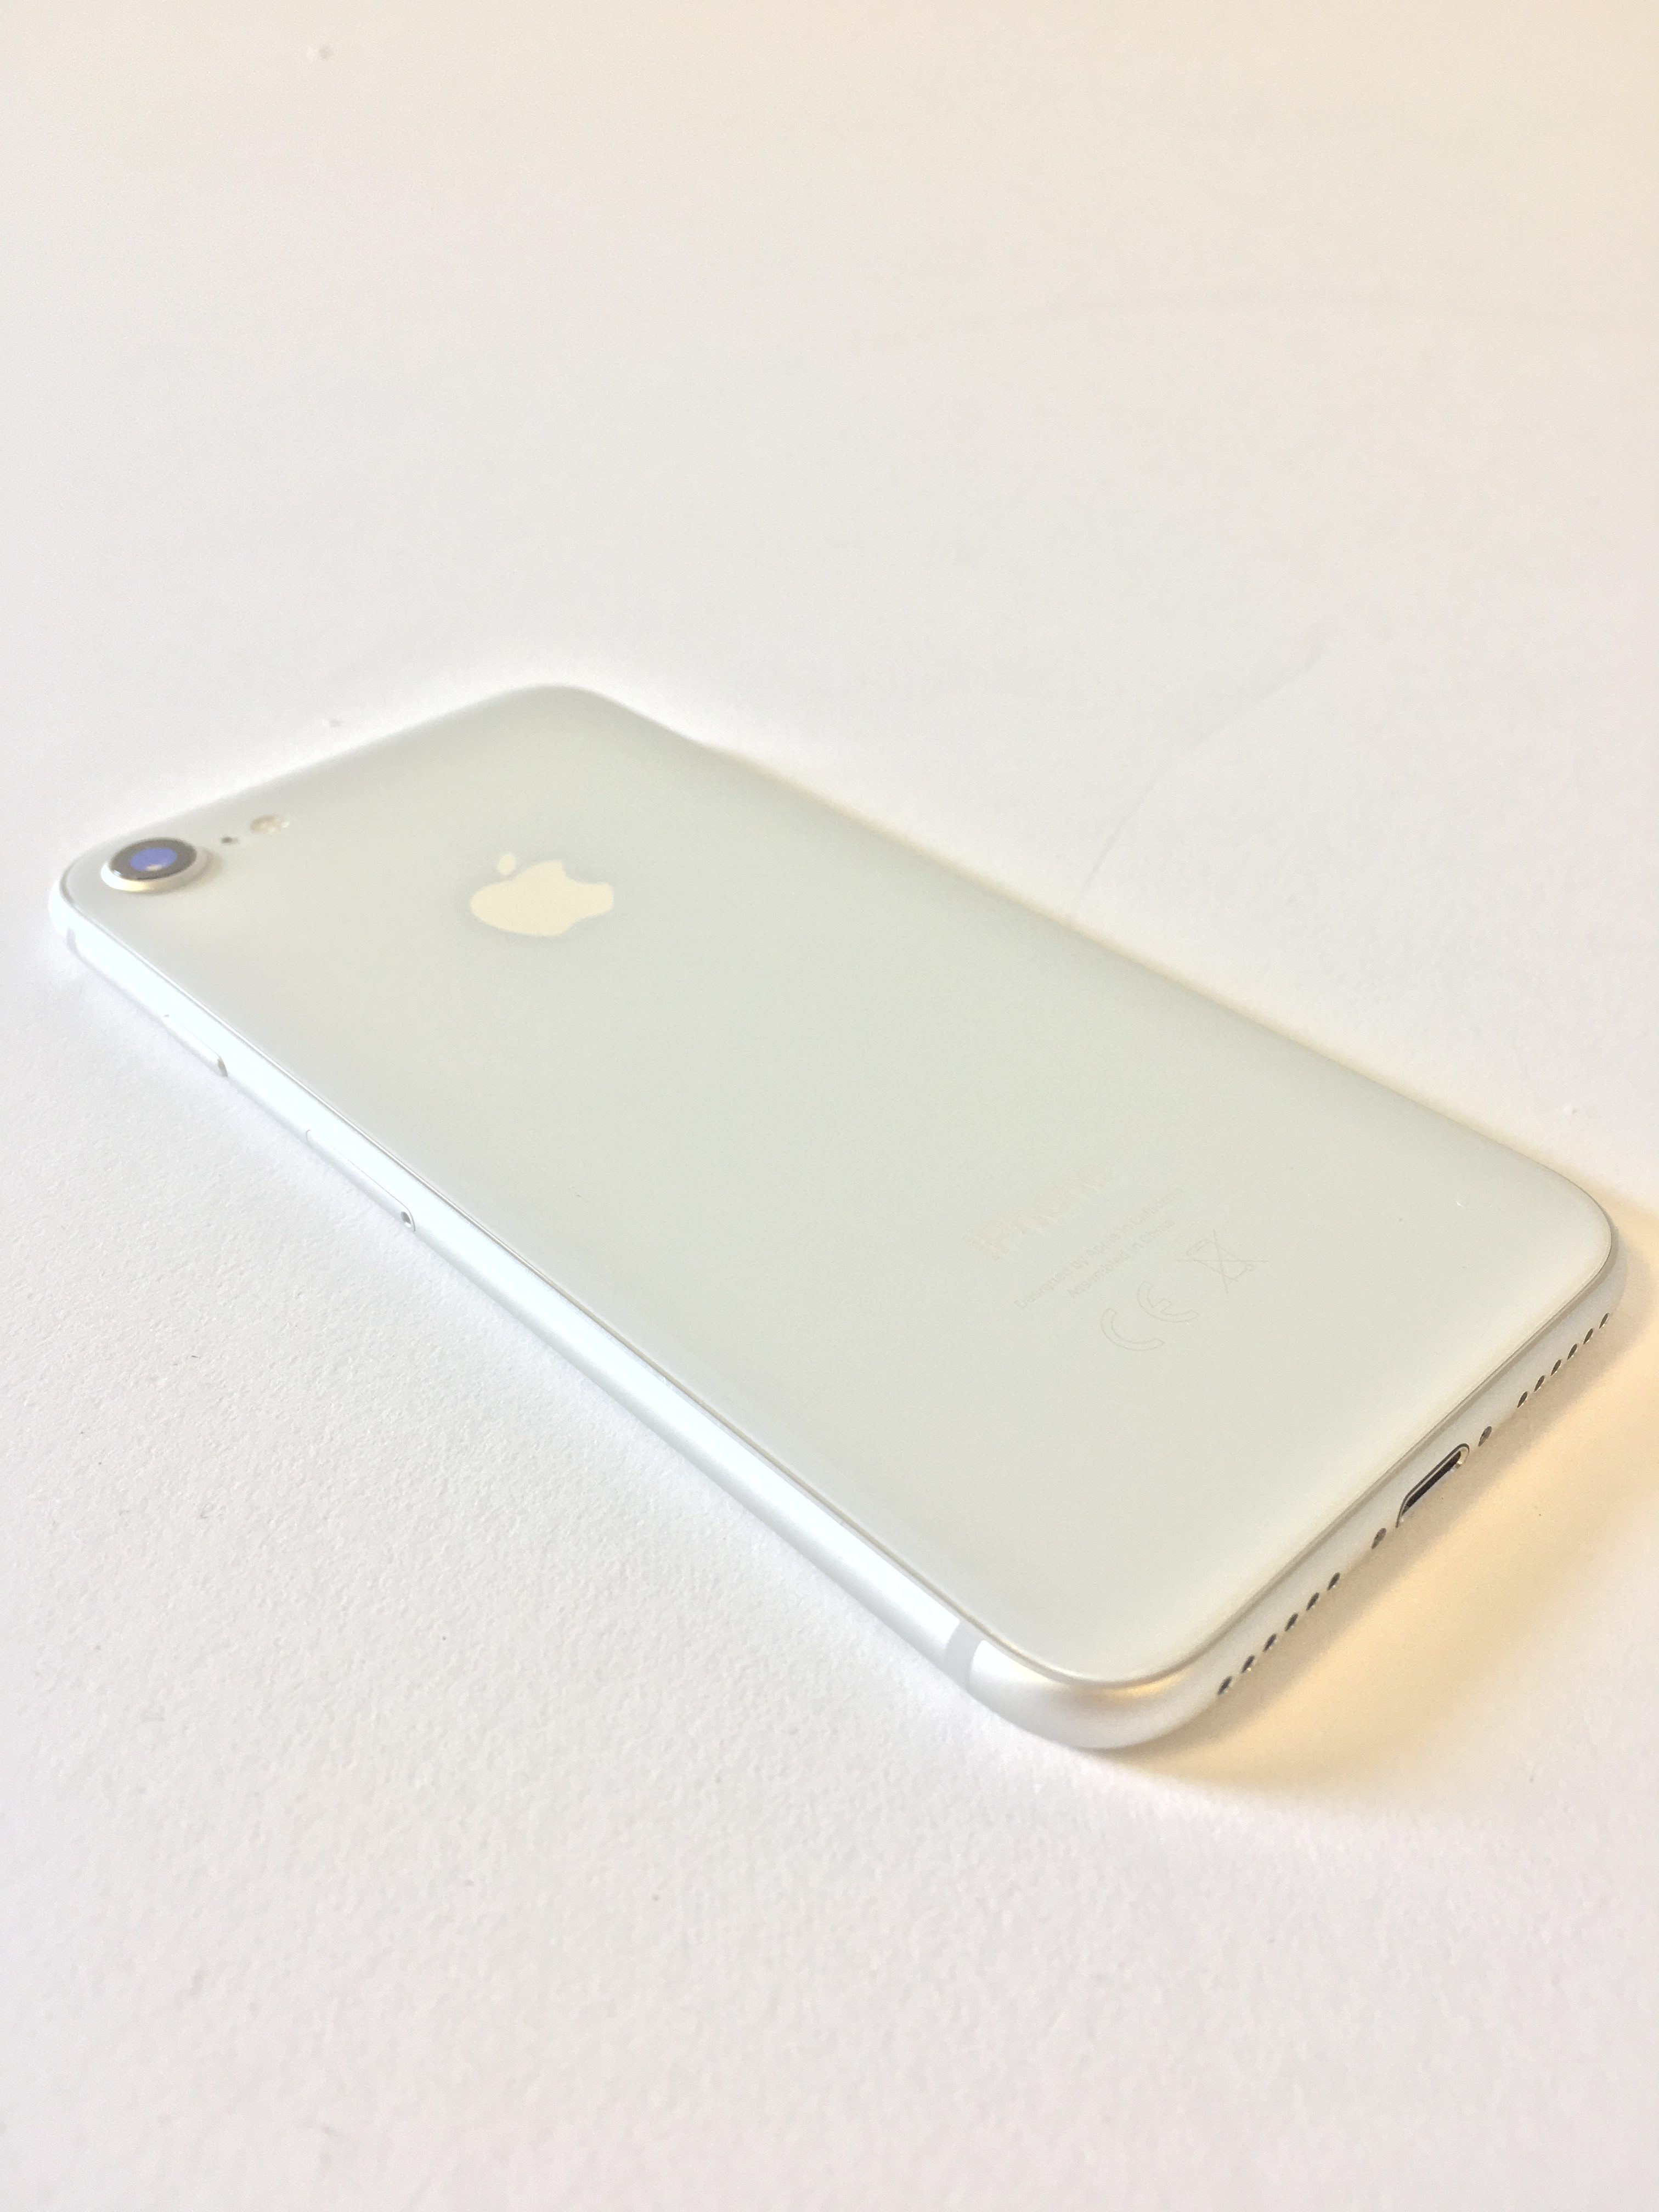 iPhone 8 64GB / silver - mResell.co.uk